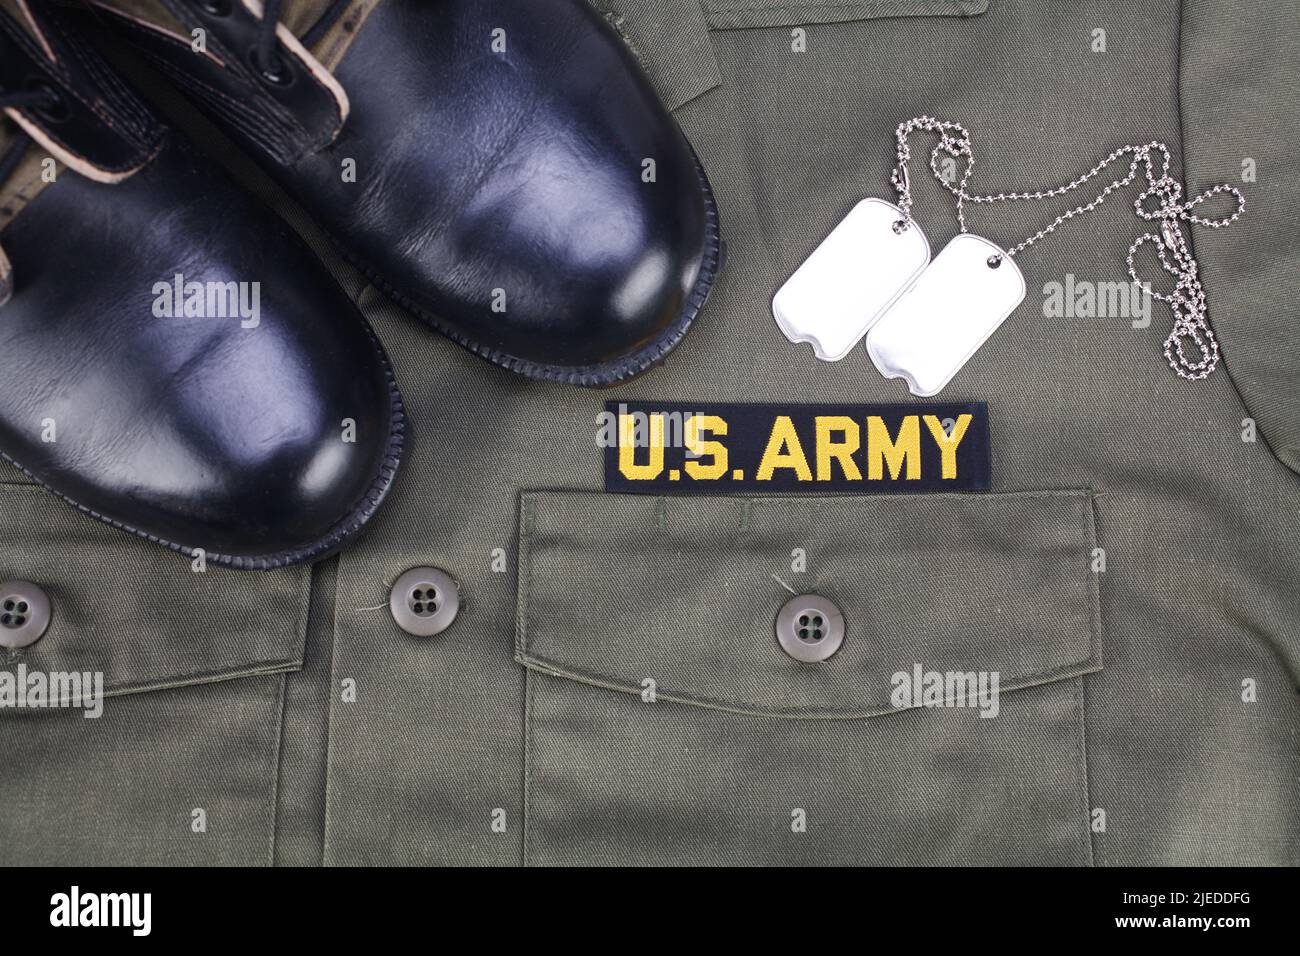 Uncle sam wants you - U.S. Army Branch Tape with dog tags and boots on olive green uniform background Stock Photo